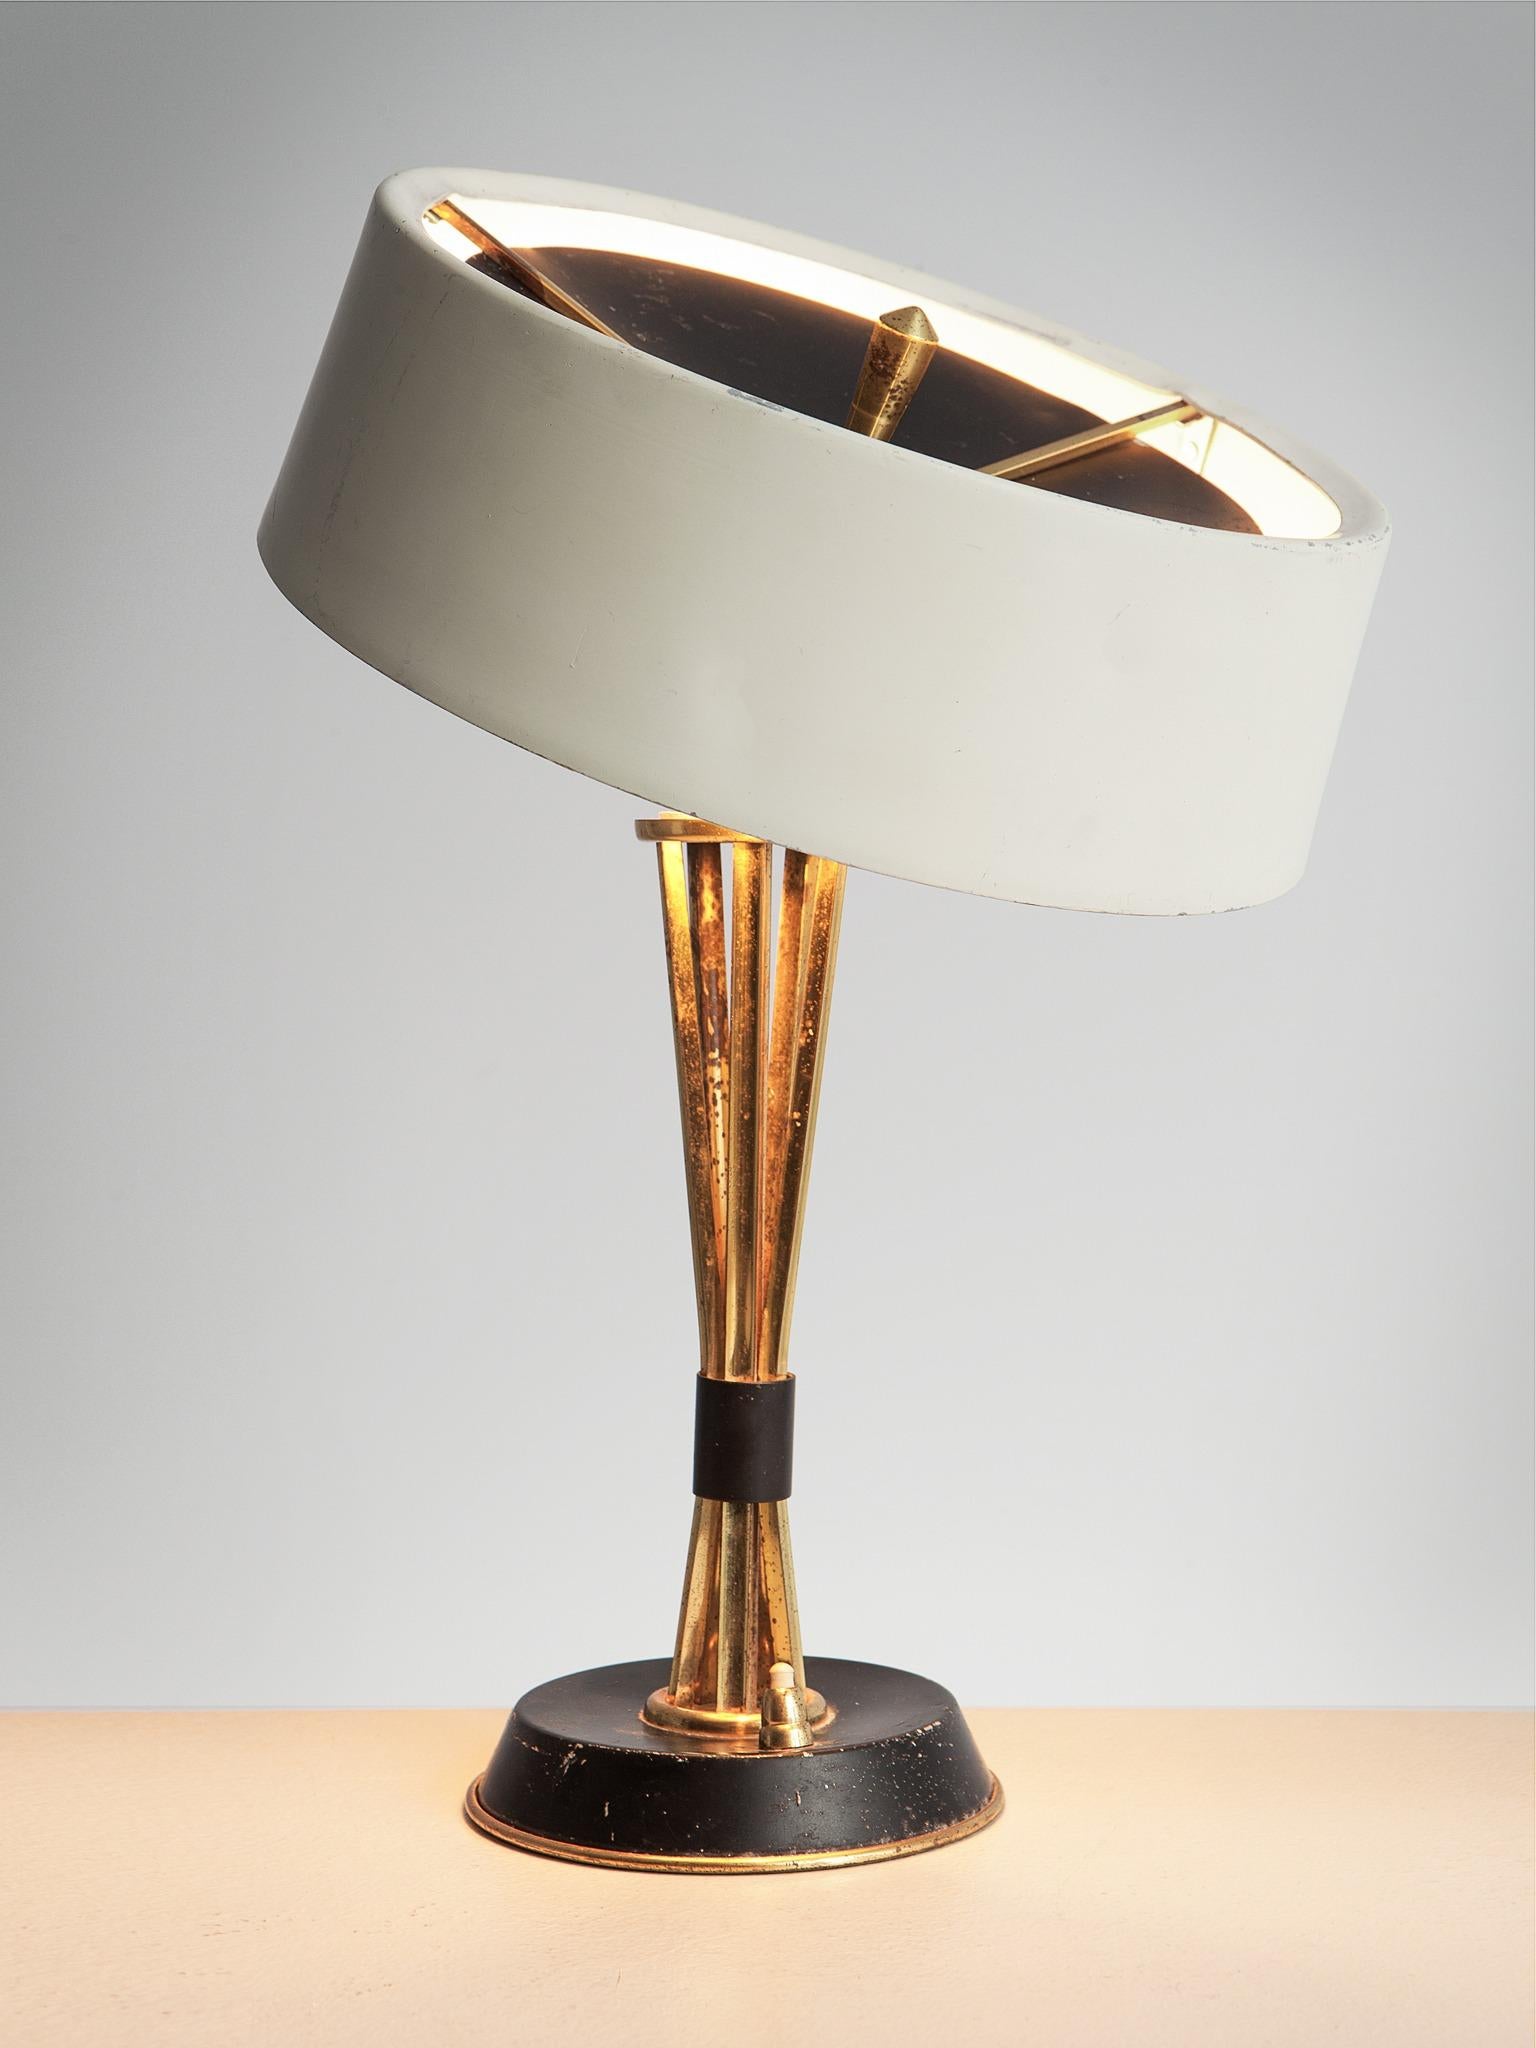 Oscar Torlasco for Lumi Milano, table light in brass and aluminum, Italy, 1960s.

This Italian table lamp is designed by Oscar Torlasco for Lumi
Milano. The stem is executed patinated brass that exists of several square stems that that sprout